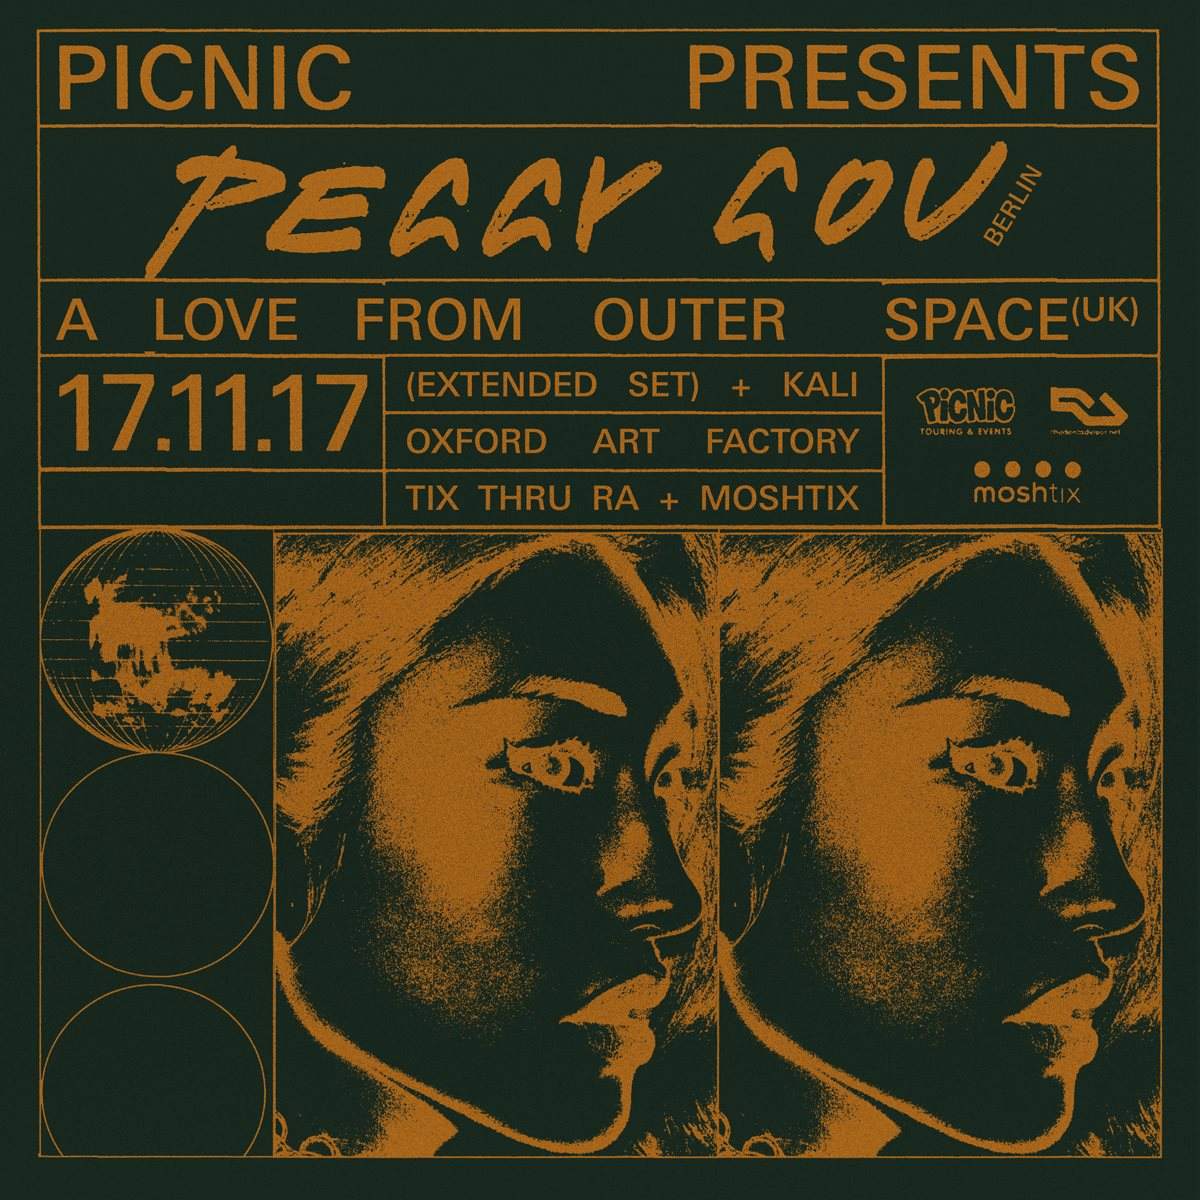 Picnic presents Peggy Gou + A Love From Outer Space - Página frontal